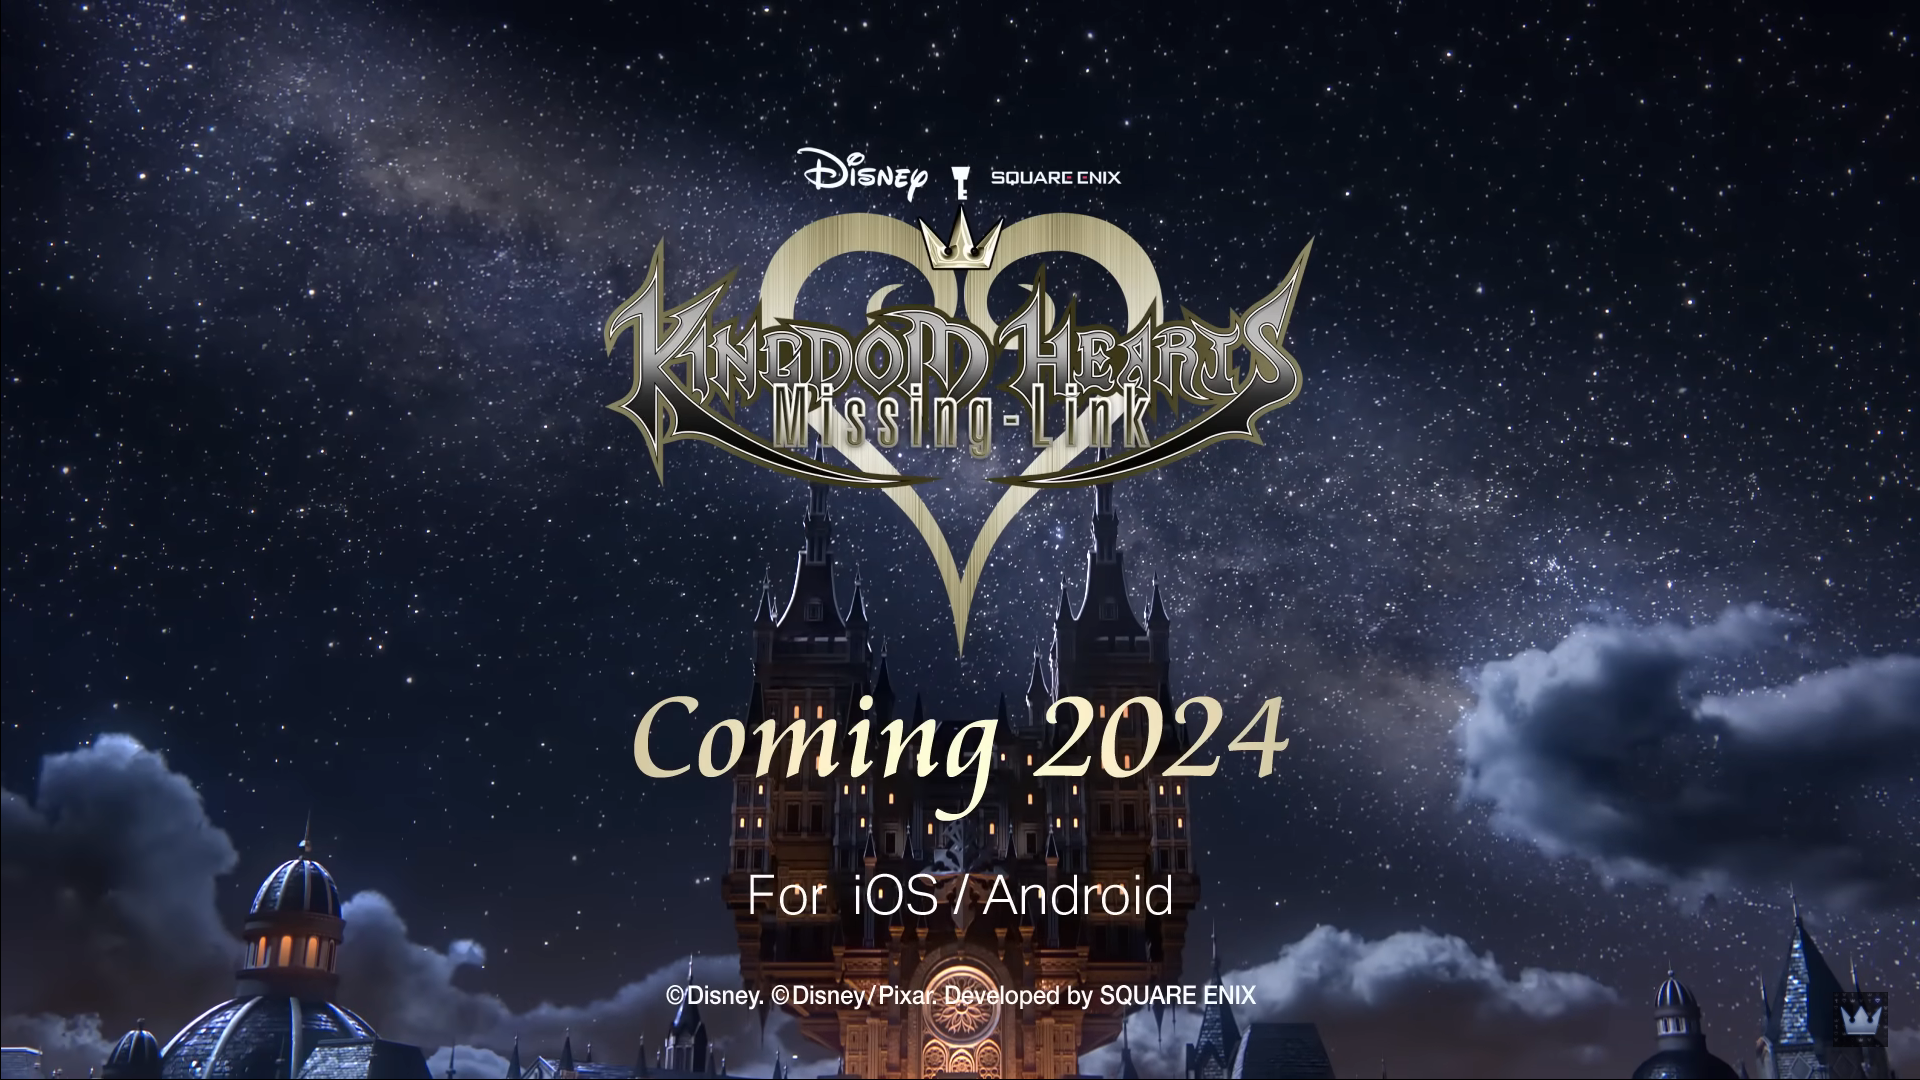 Kingdom Hearts: Missing-Link Trailer Logo with Release Date